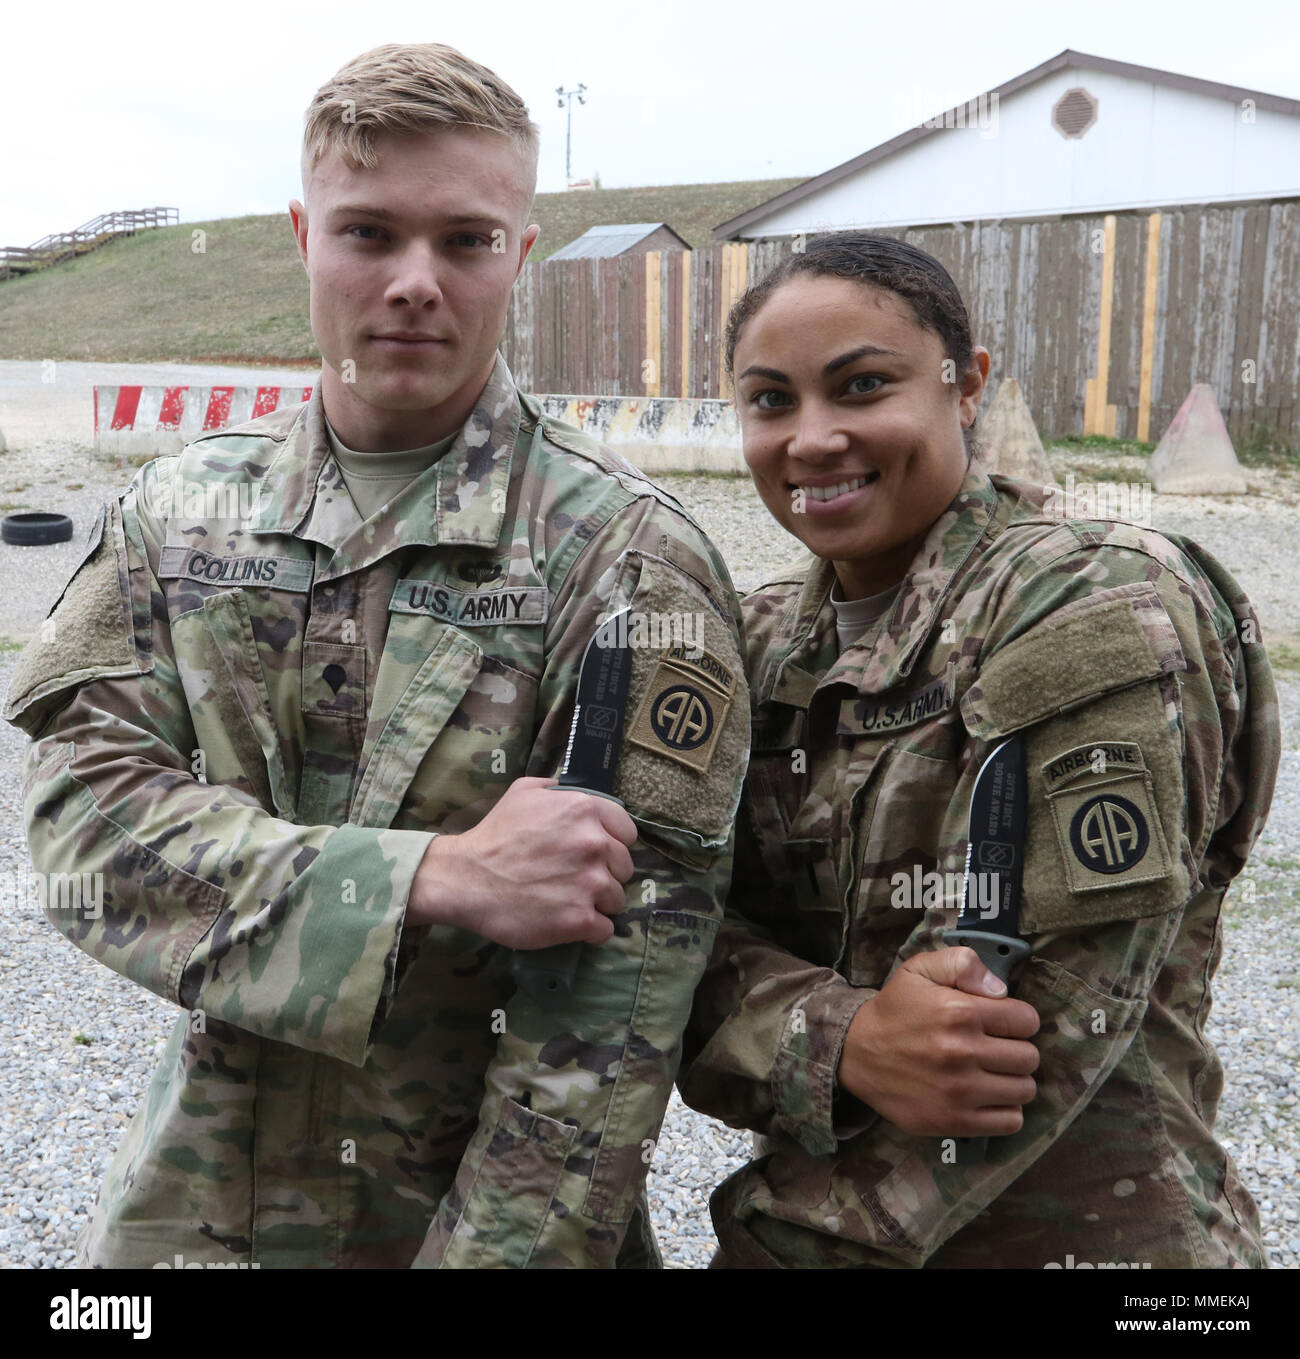 Spc. Elliot Collins and 1st Lt. Azura Lewis of the Liaison Monitoring Team out of Camp Bondsteel, Kosovo, pose with their combat knives awarded to them for winning the Bowie Challenge, September 28, 2017, at Camp Bondsteel, Kosovo. (U.S. Army photo by Staff Sgt. Nicholas Farina) Stock Photo